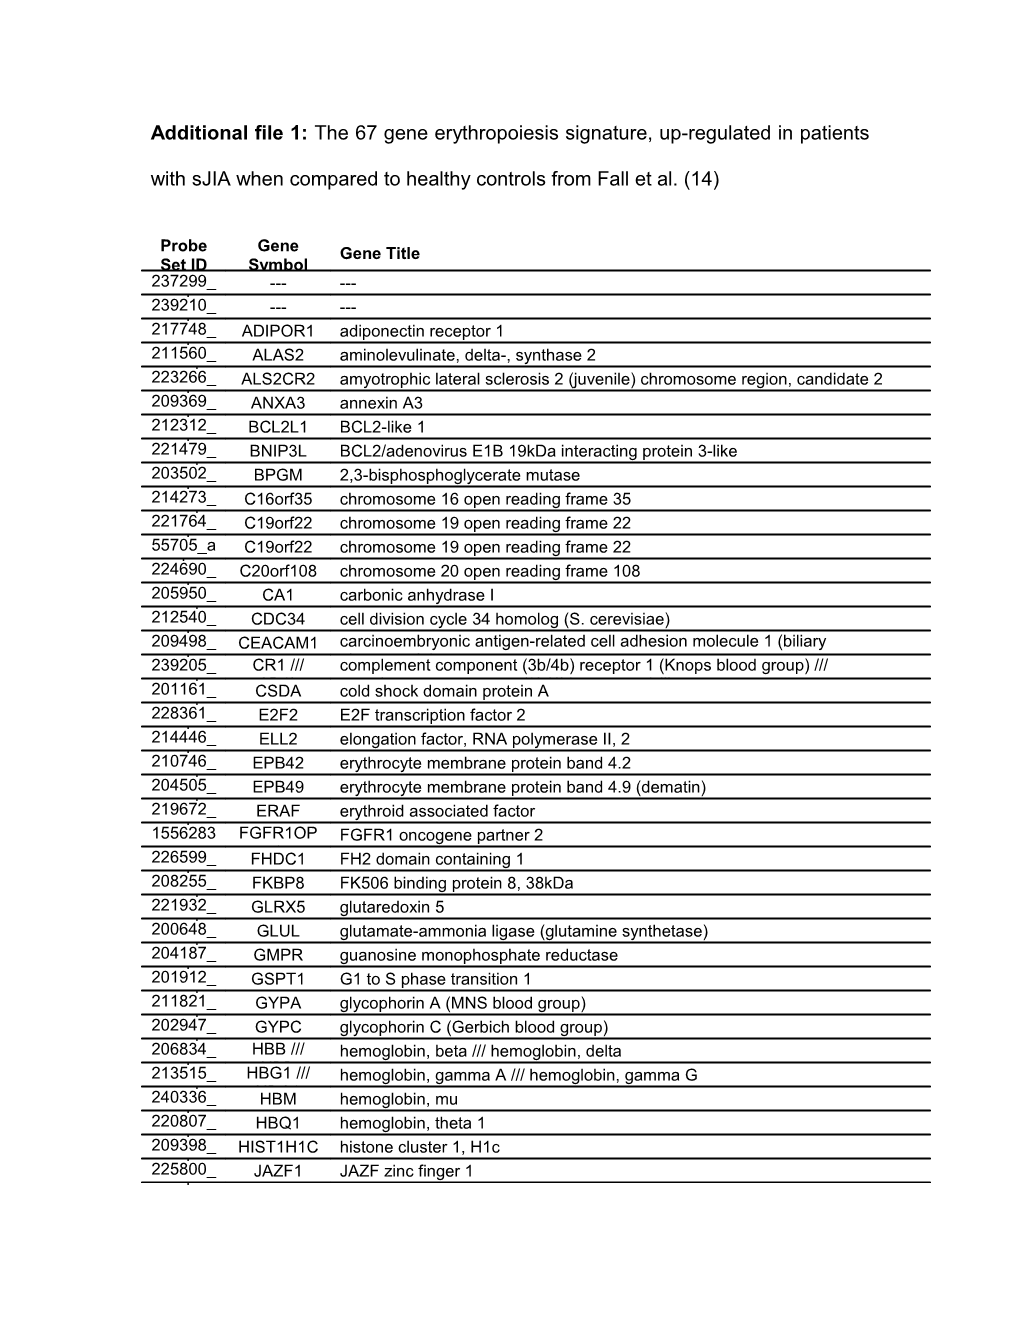 Supplementary Table 1: the 67 Gene Erythropoiesis Signature, Up-Regulated in Patients With